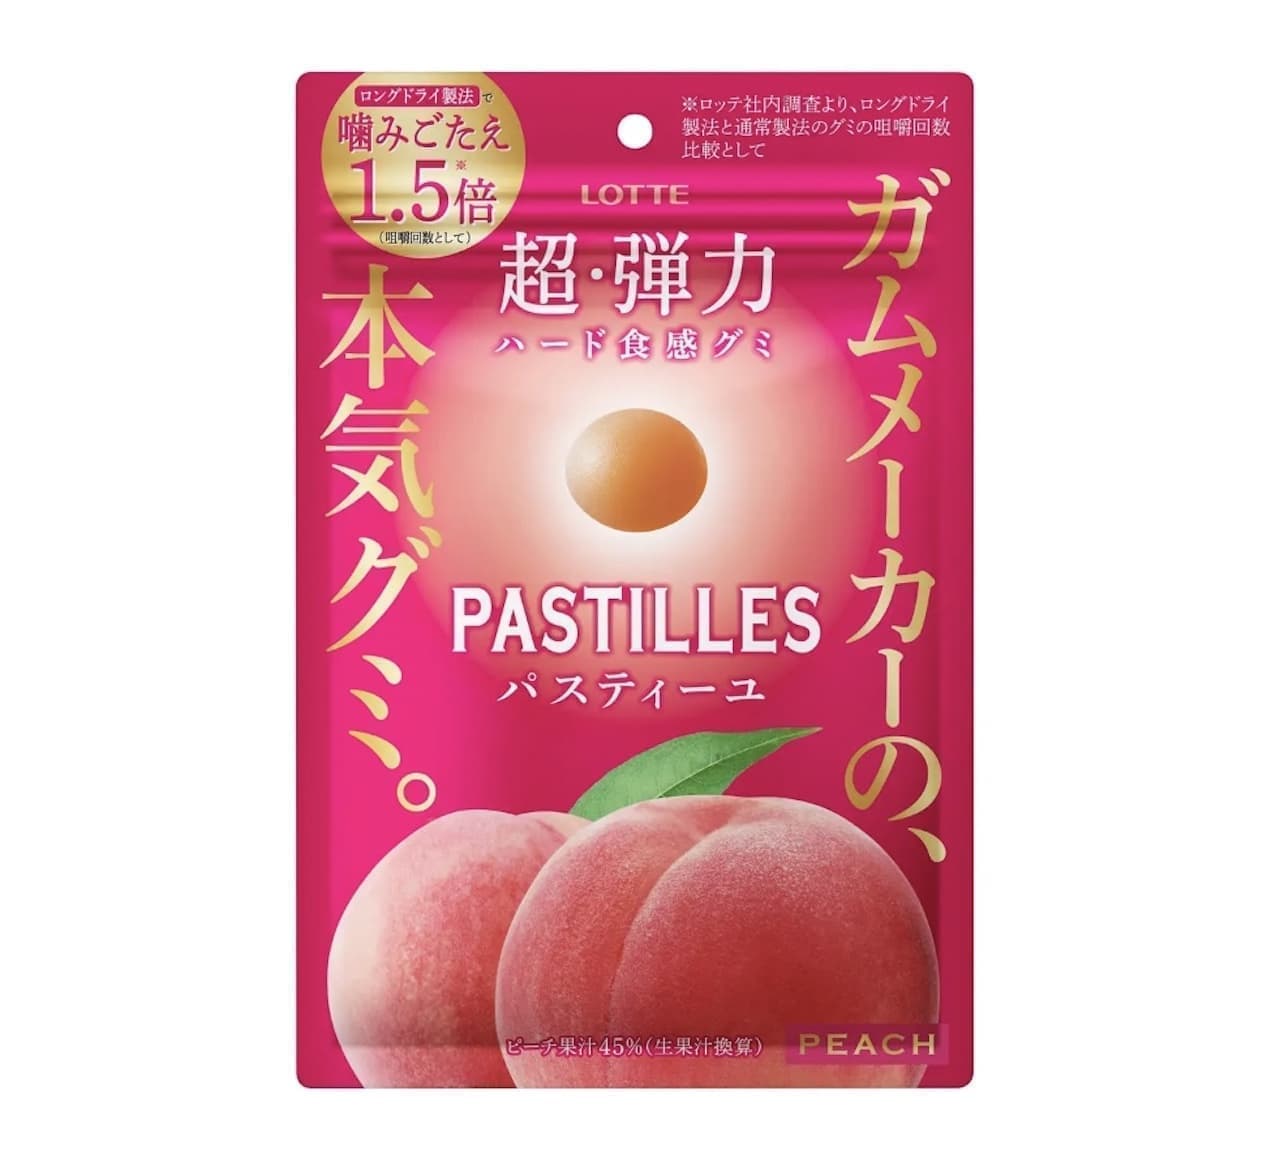 Pastille [Peach]" from Lotte